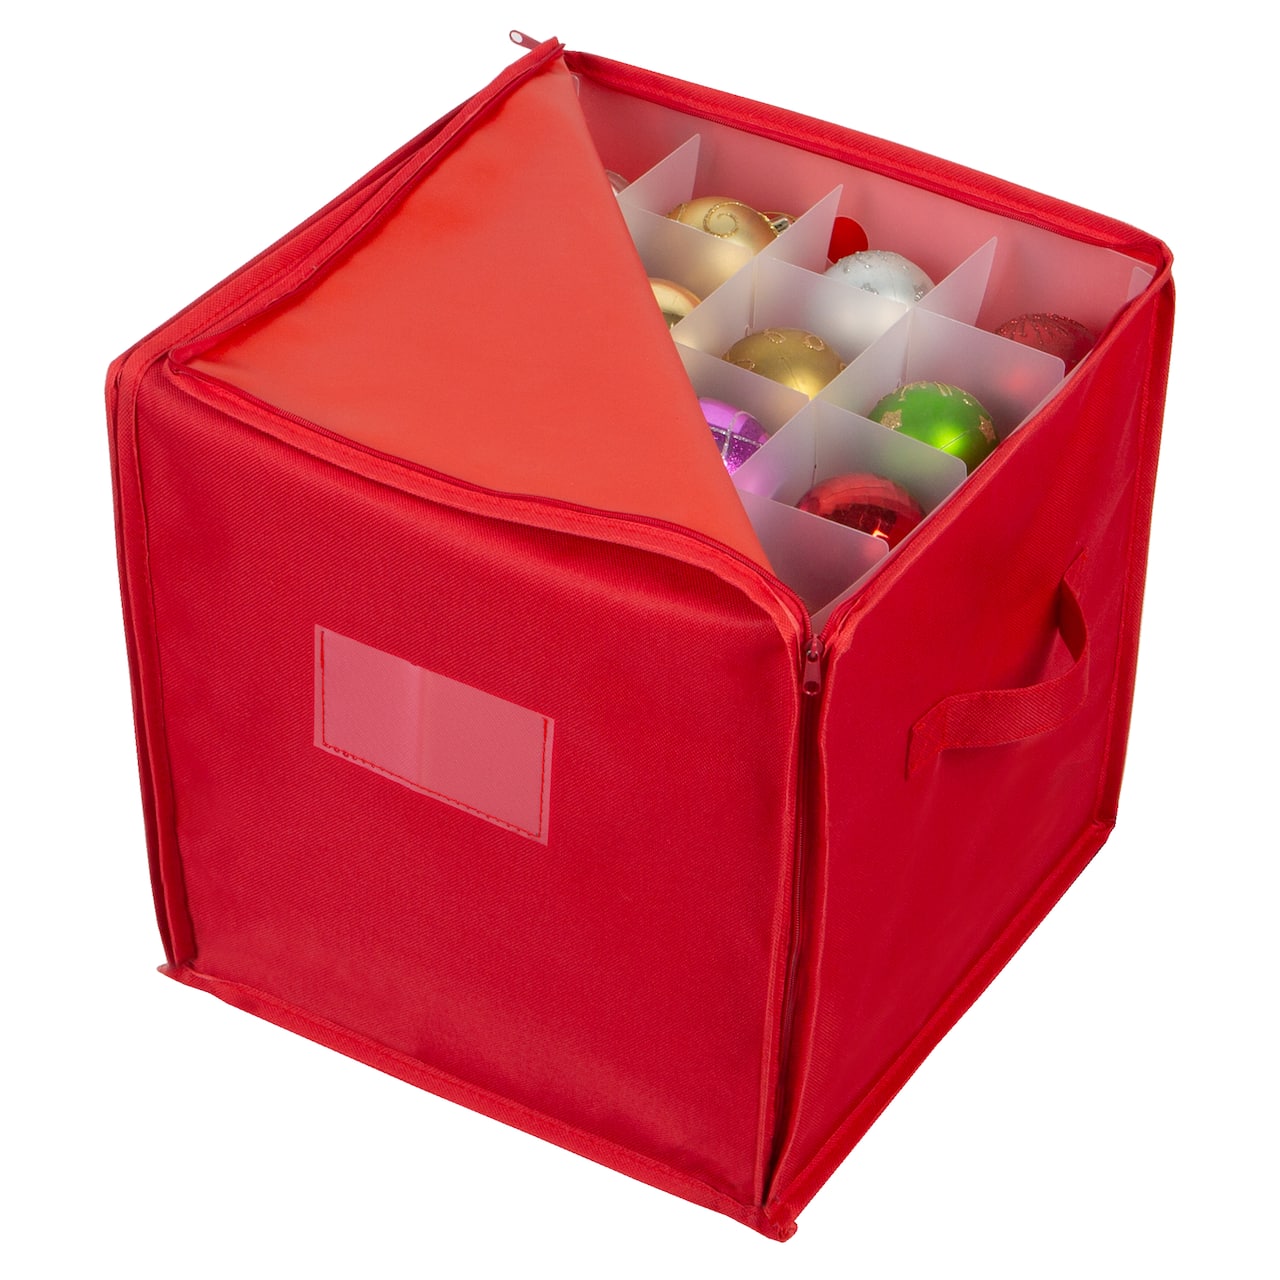 Simplify Stackable Christmas Ornament Storage Box